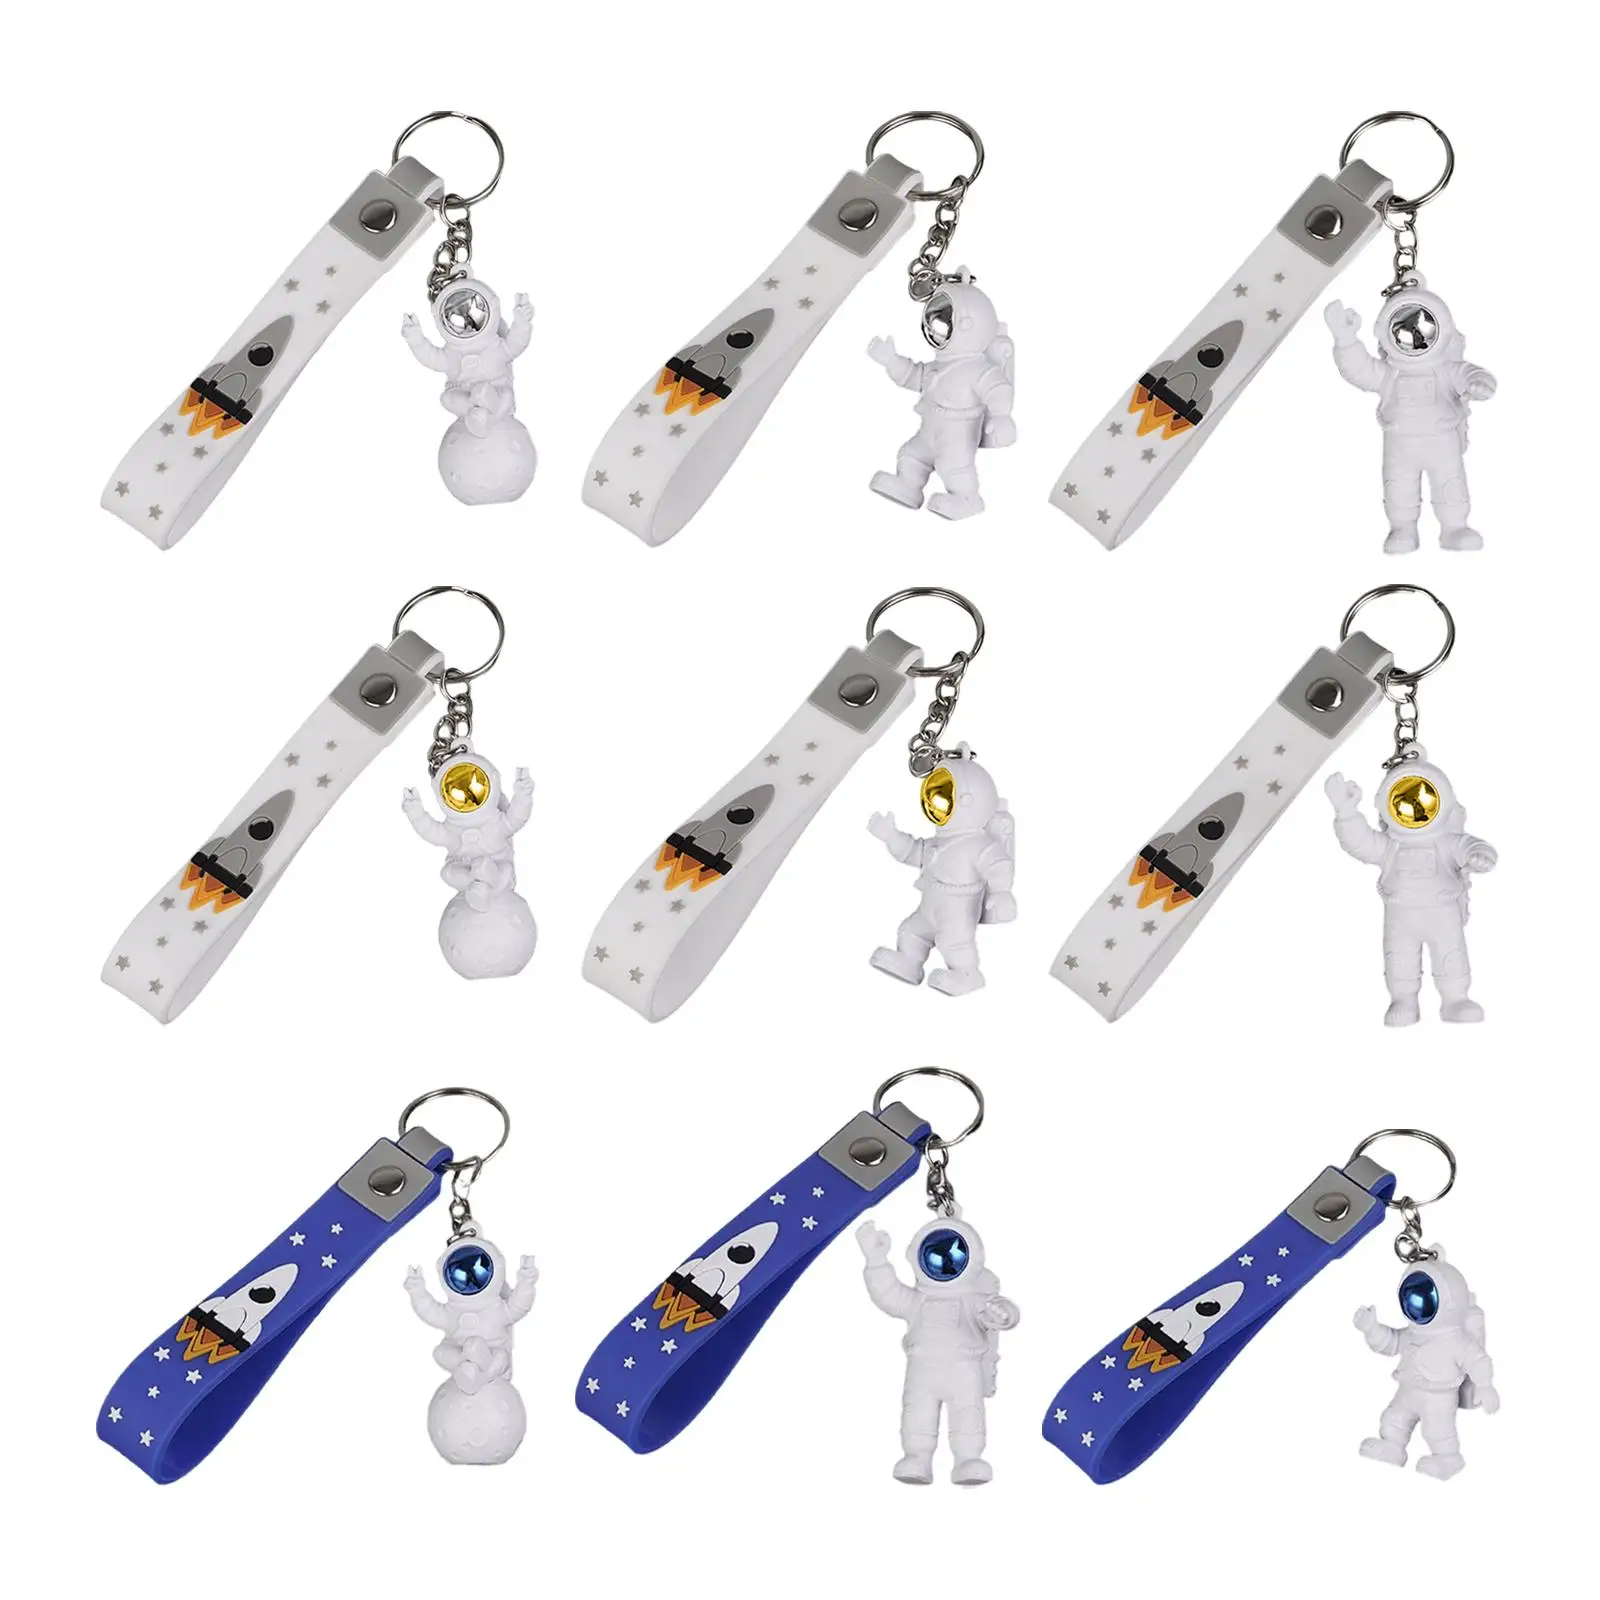 3 Pieces Outer Space Keyring Waterproof Pendant Creative Keychain for Lovers Gifts